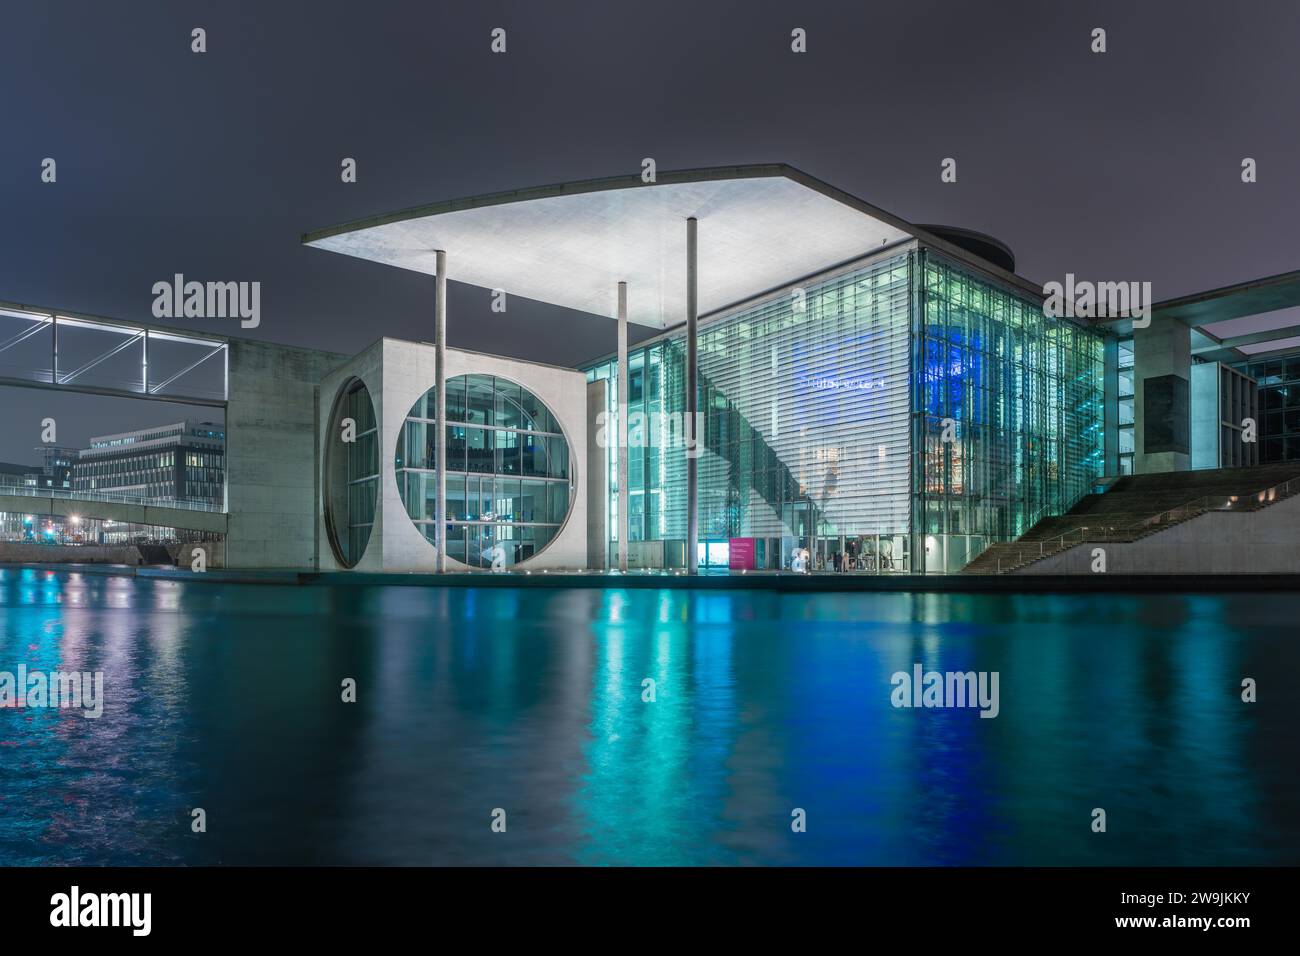 Night view of a government building with water reflection, Library of the German Bundestag, Berlin, Germany Stock Photo